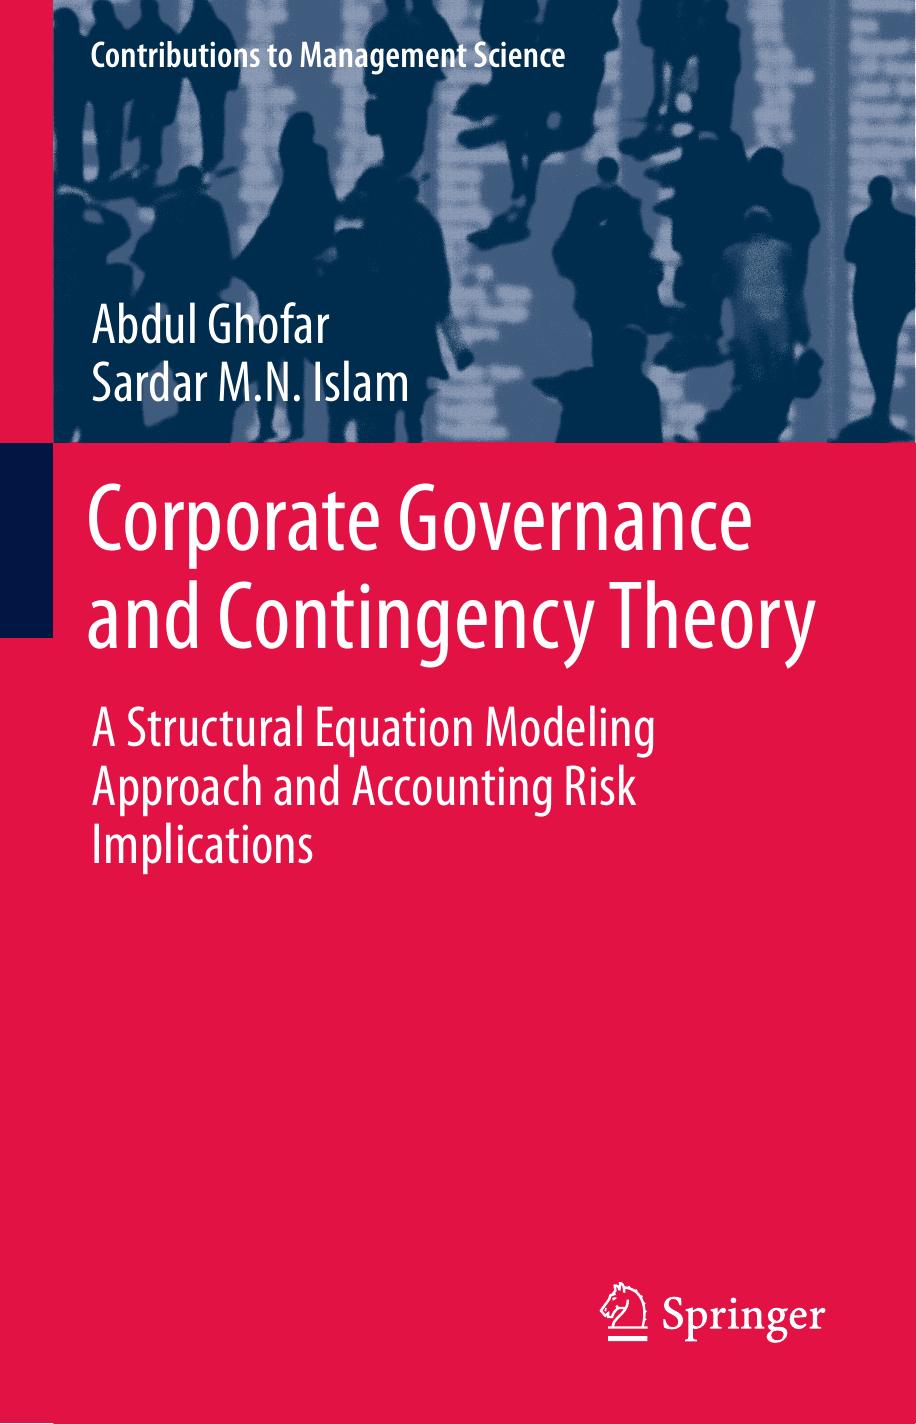 Corporate Governance and Contingency Theory  A Structural Equation Modeling Approach and Accounting Risk Implications 2015